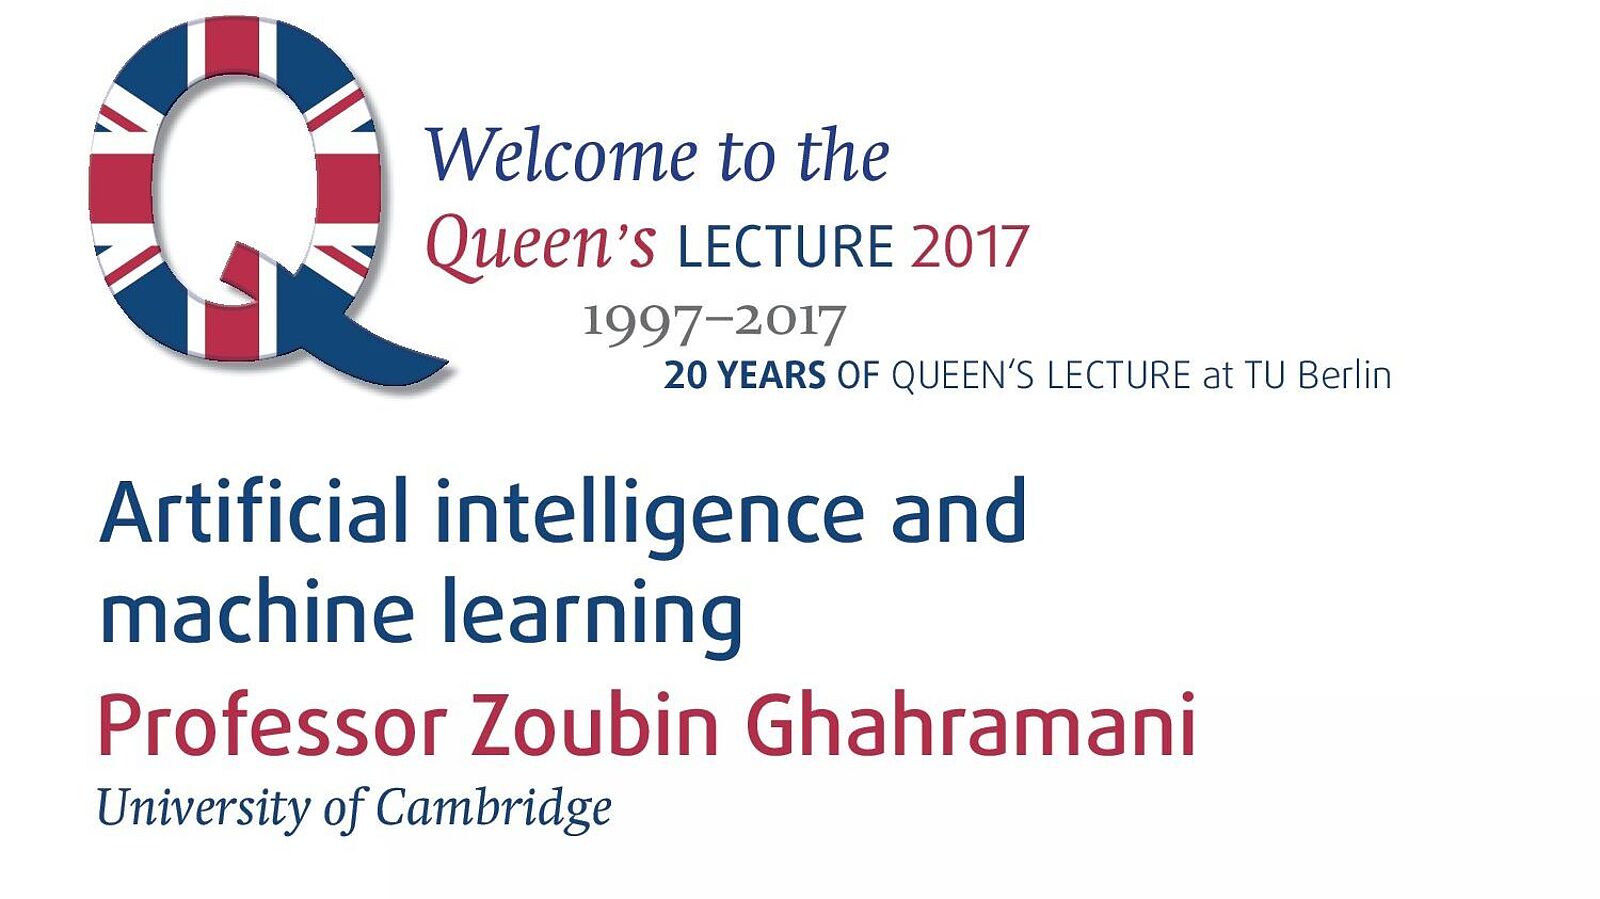 Queen's Lecture 2017